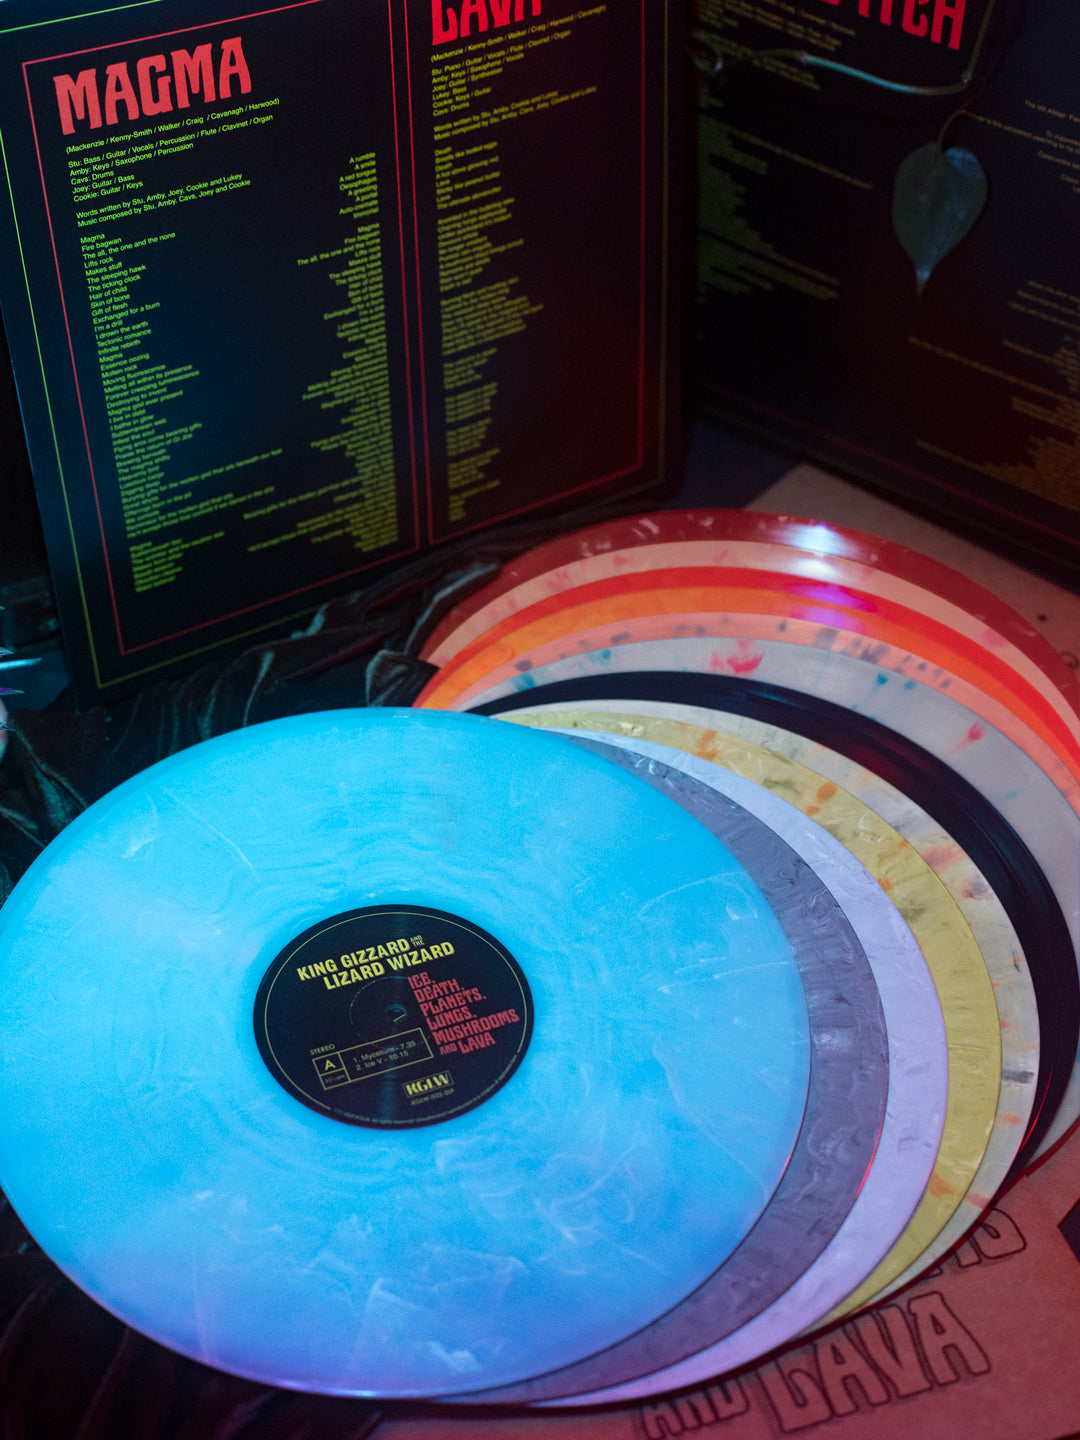 Ice, Death, Planets, Lungs, Mushrooms and Lava Color LPs